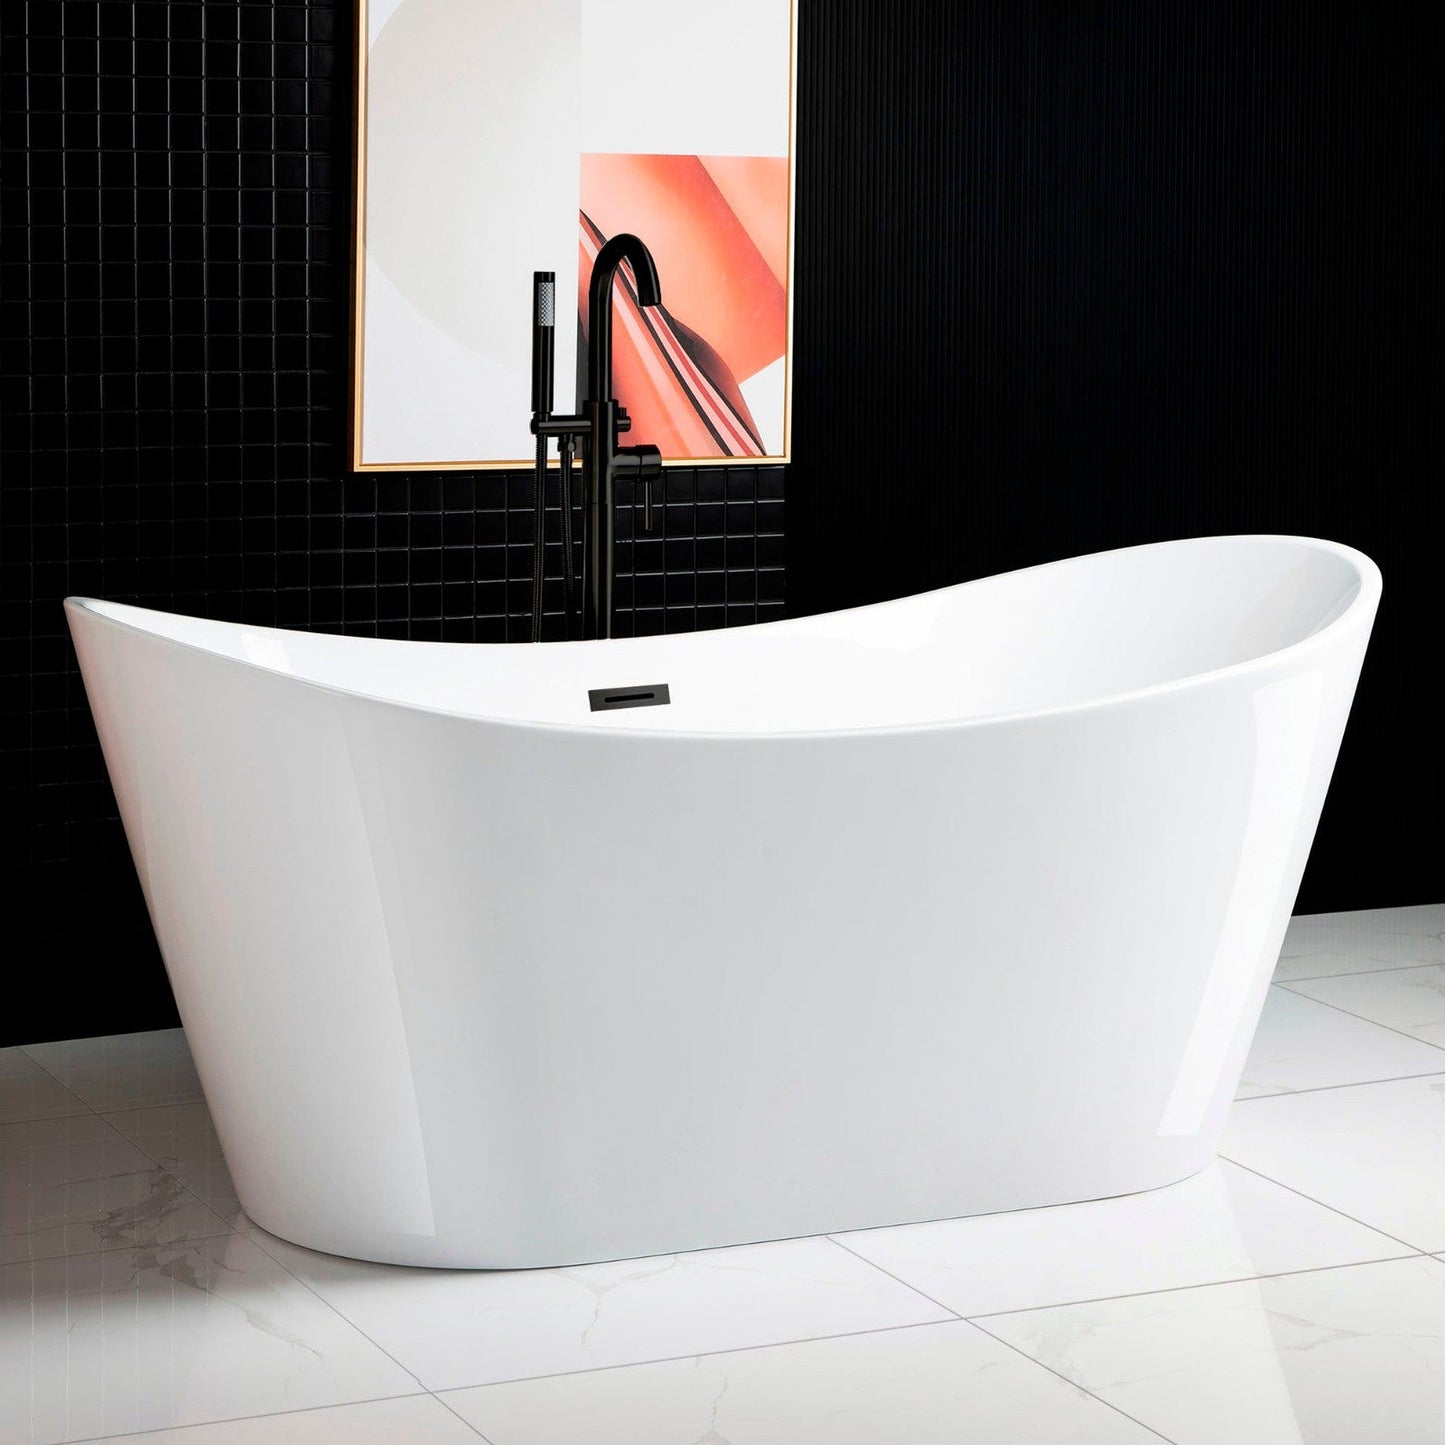 WoodBridge B0010 67" White Acrylic Freestanding Contemporary Soaking Bathtub With Matte Black Drain, Overflow, F0037MB Tub Filler and Caddy Tray